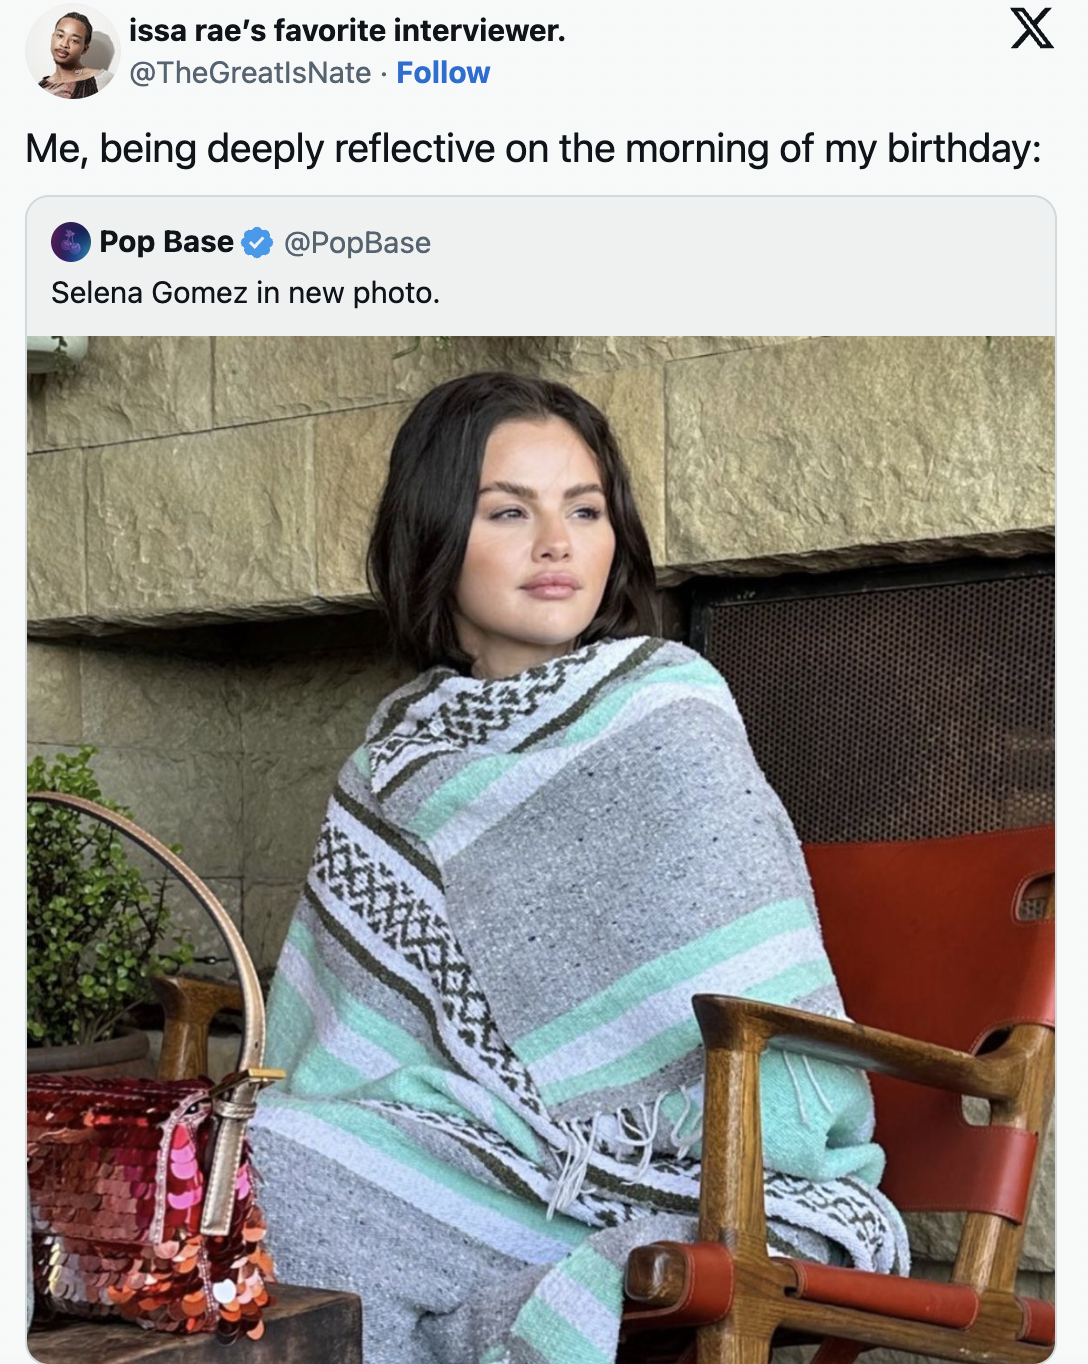 selena gomez in a blanket - knitting - issa rae's favorite interviewer. Me, being deeply reflective on the morning of my birthday X Pop Base Selena Gomez in new photo.